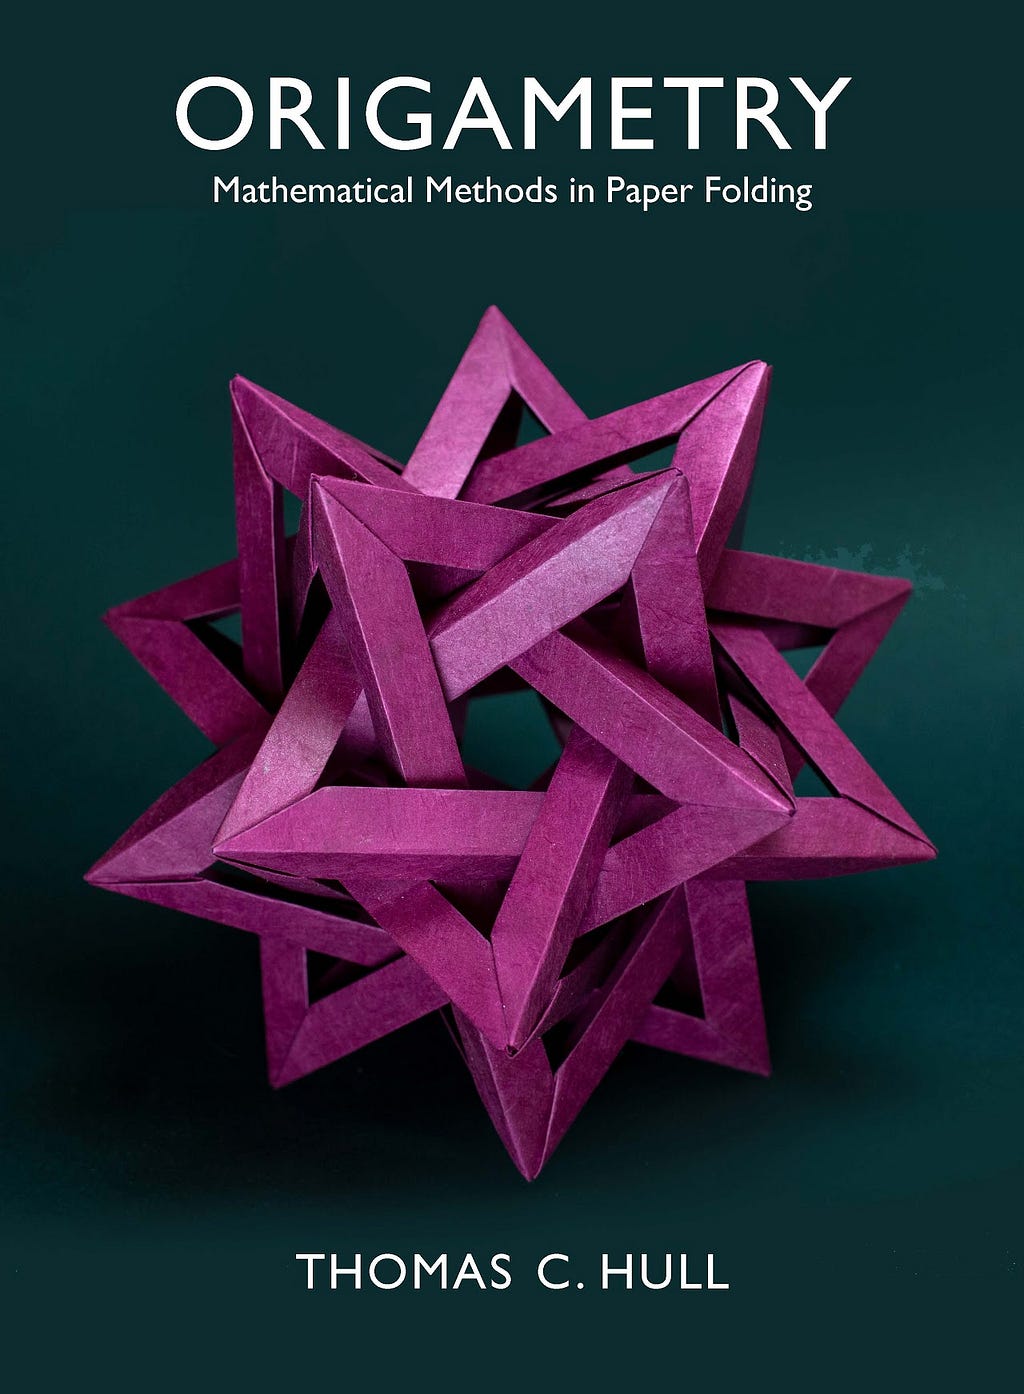 The cover of Thomas Hull’s Origametry, featuring his Five Intersecting Tetrahedra model.